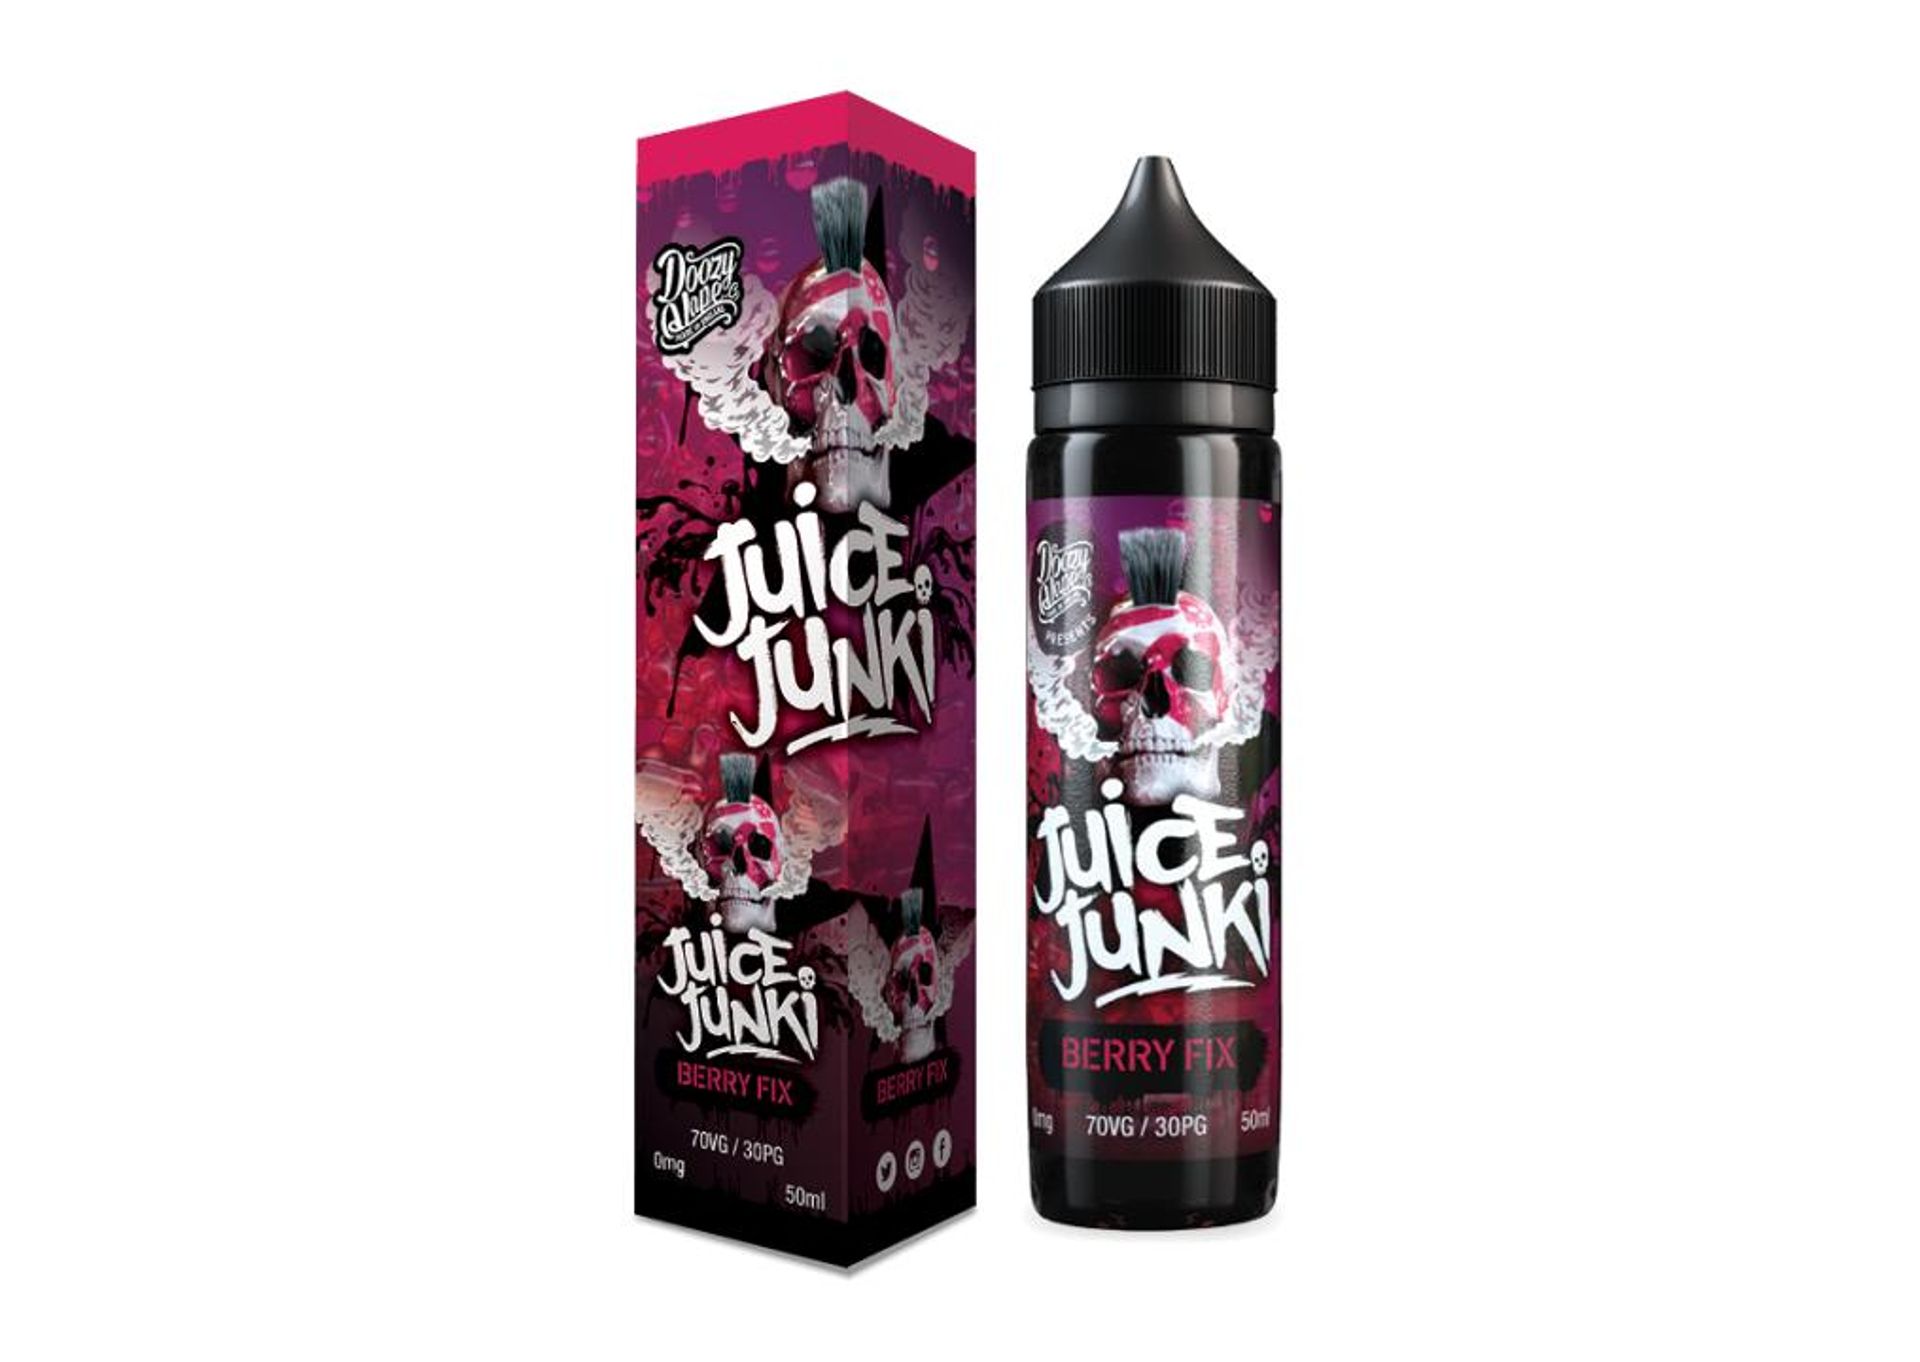 Image of Berry Fix by Juice Junki By Doozy